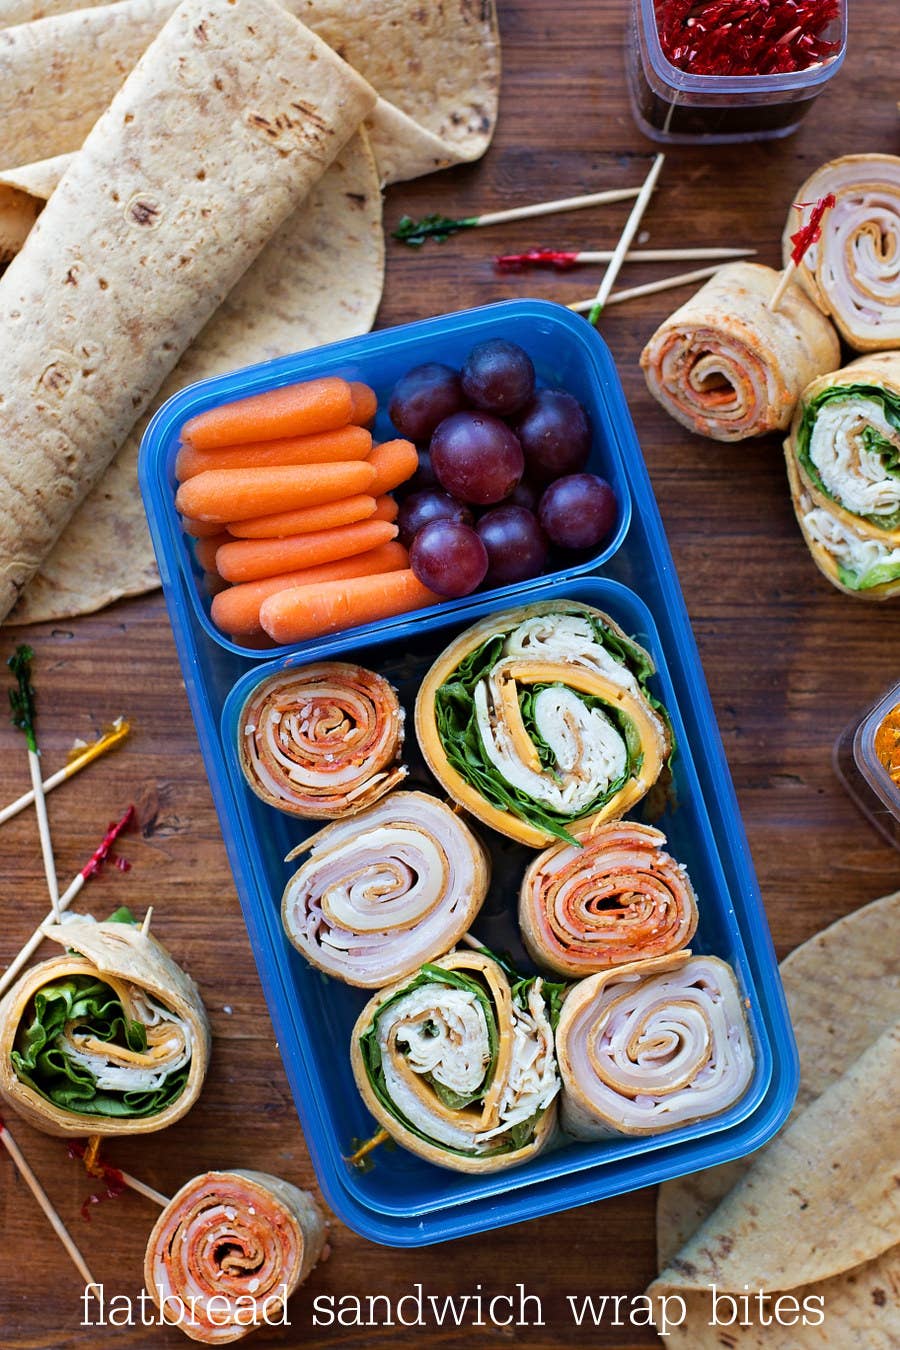 These 7  Bestselling Items Are Perfect for Back-to-School Lunches